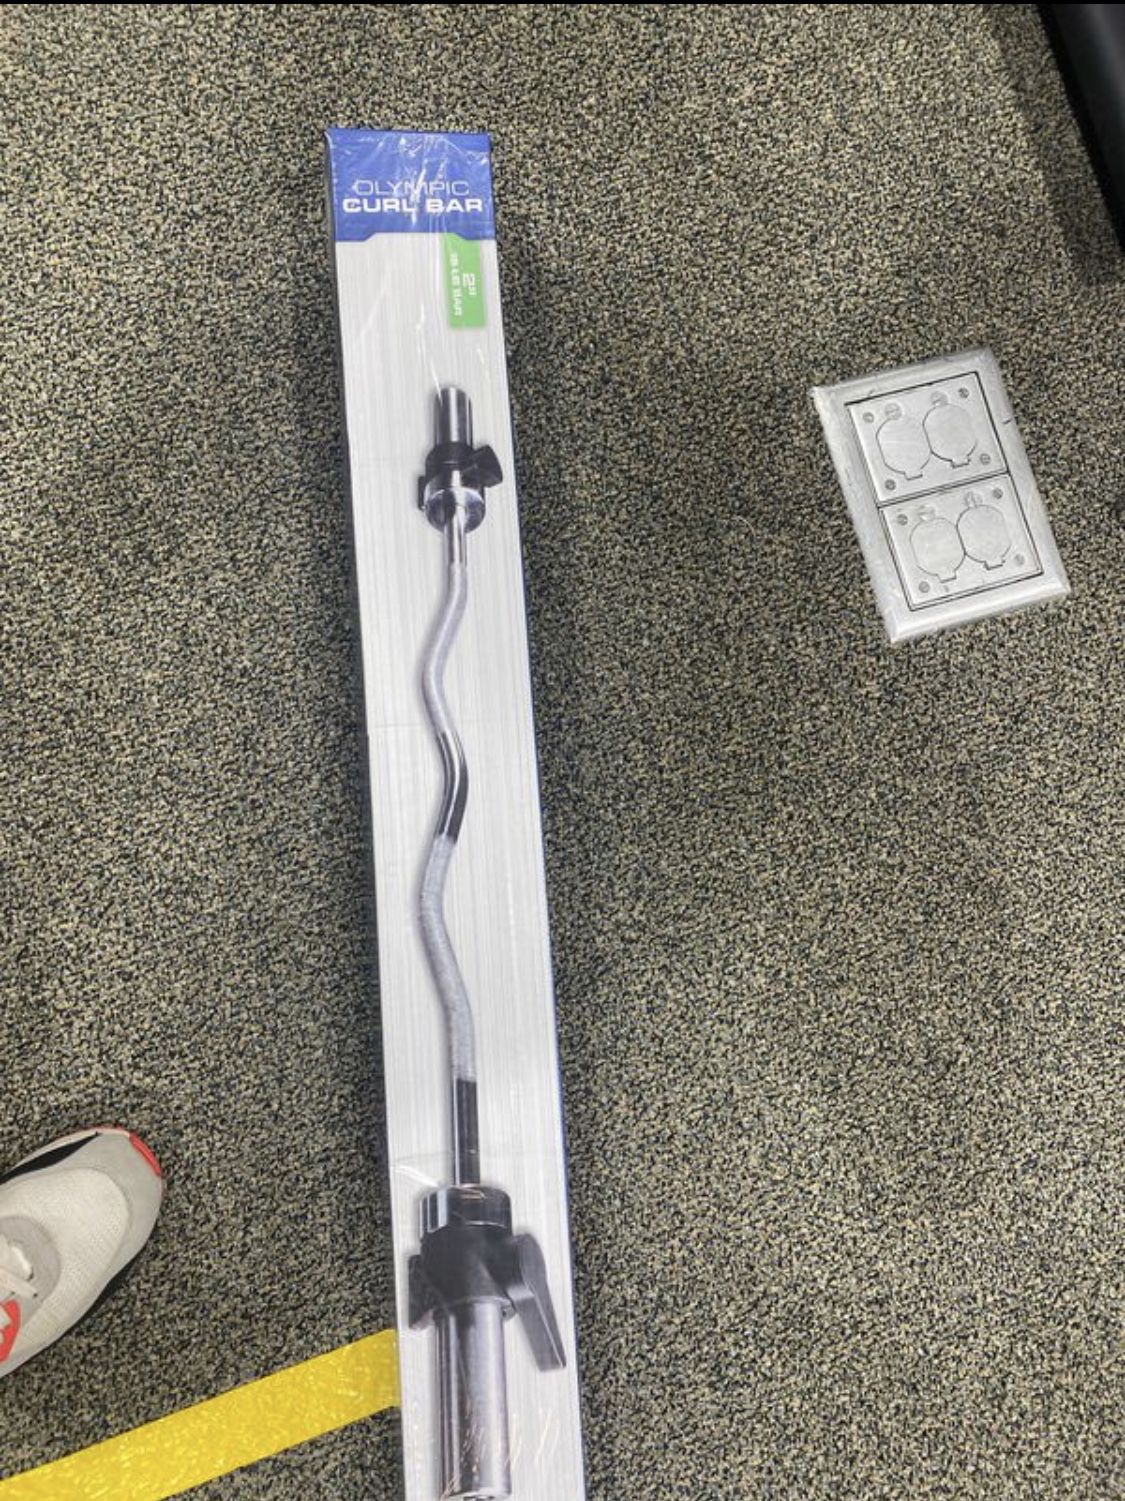 Fitness Gear Olympic Curl Bar Brand new unopened